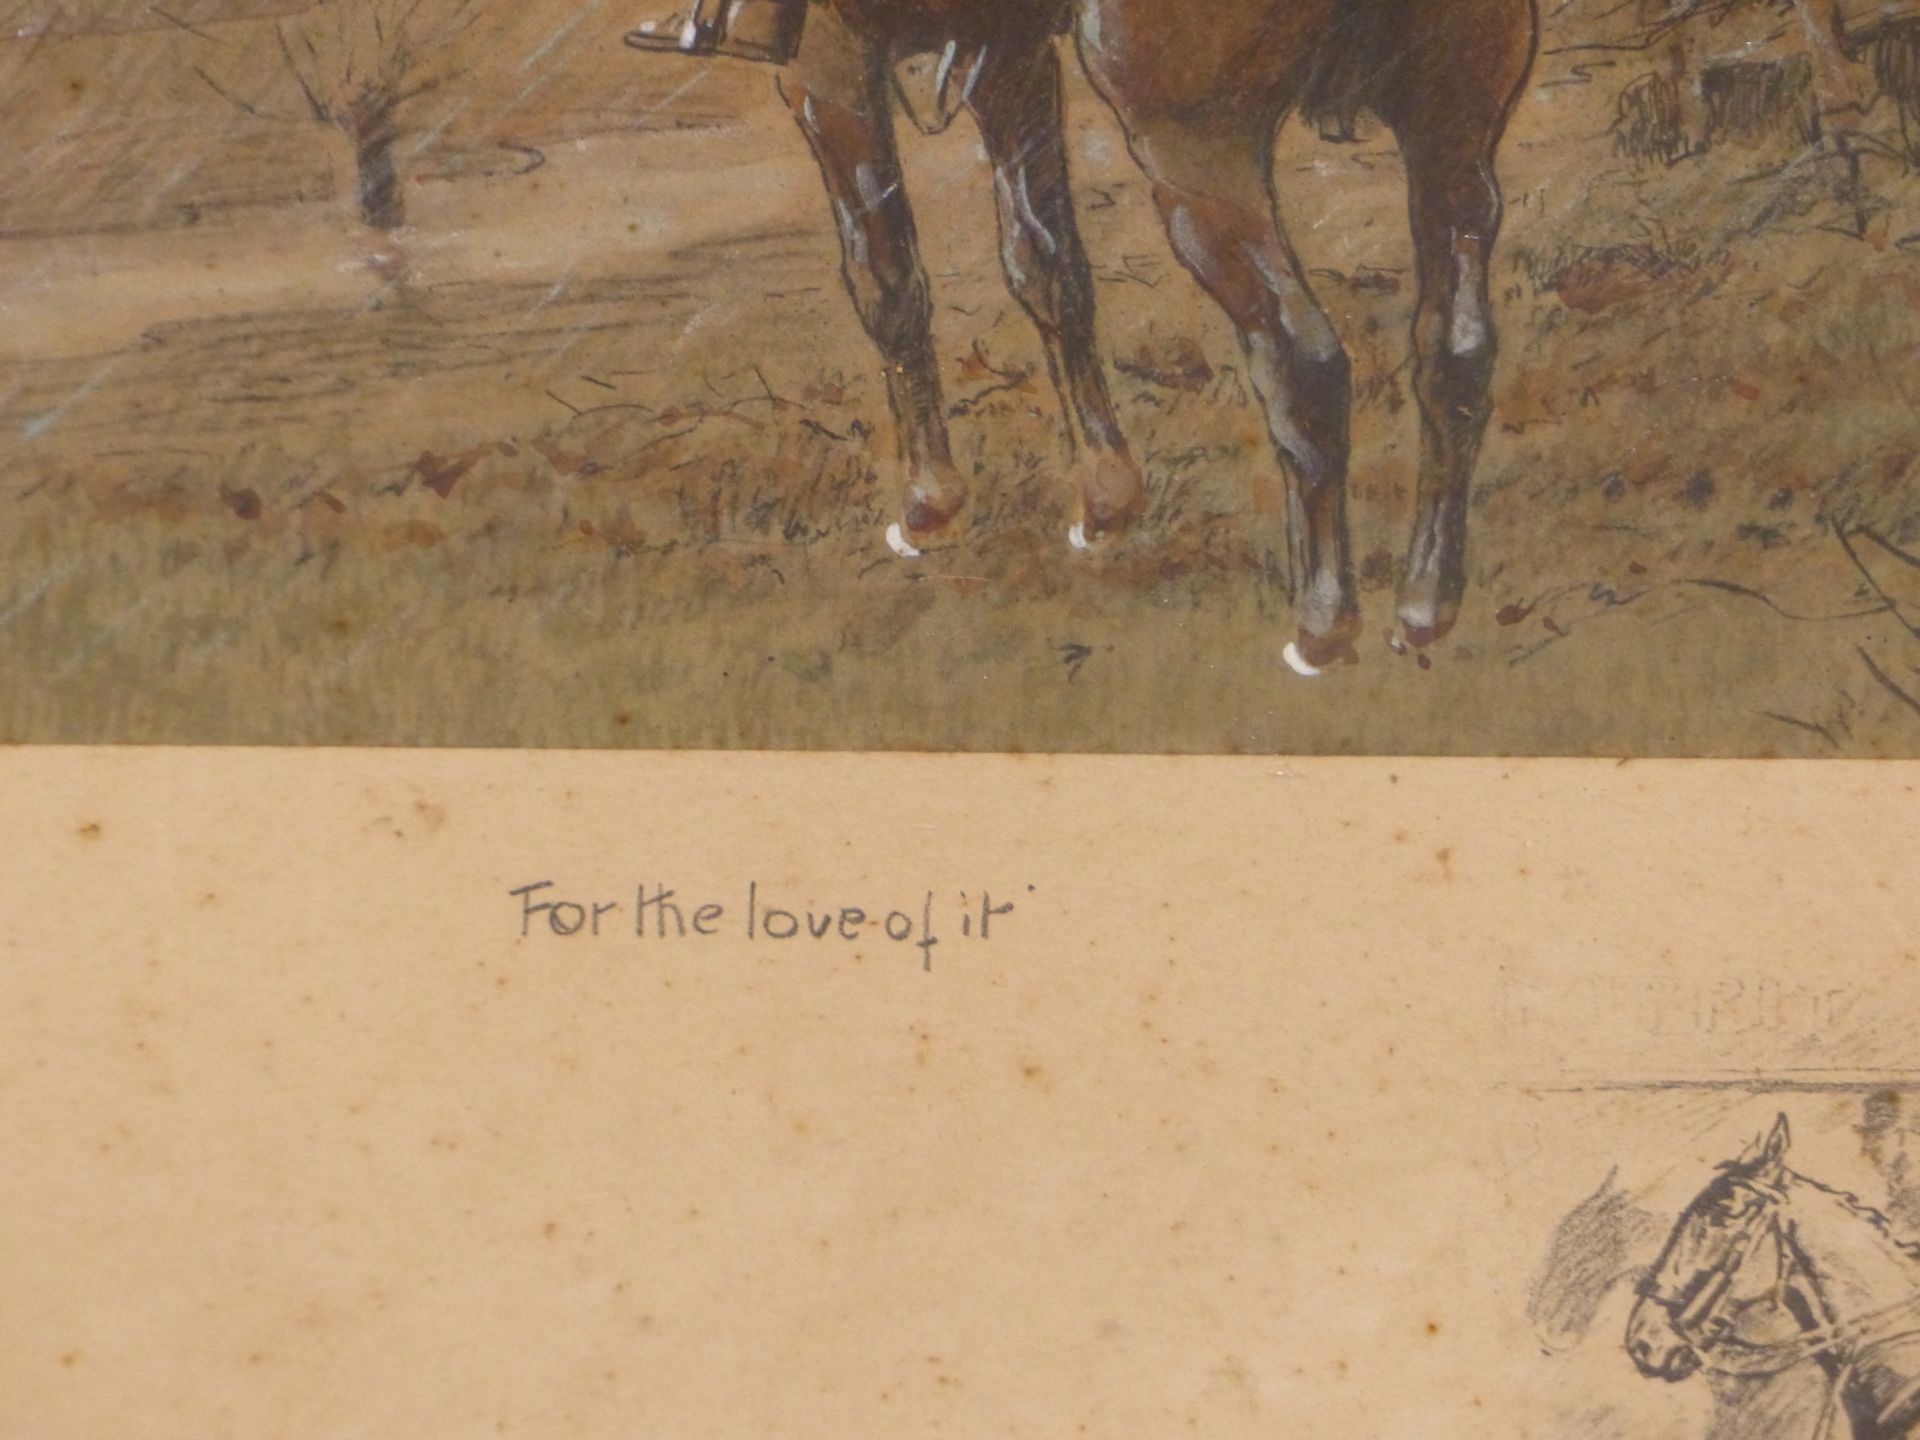 SNAFFLES- CHARLES JOHNSON PAYNE. "FOXCATCHERS" WITH REMARQUE "FOR THE RIDE OUT AND THE RIDE HOME". - Image 3 of 9